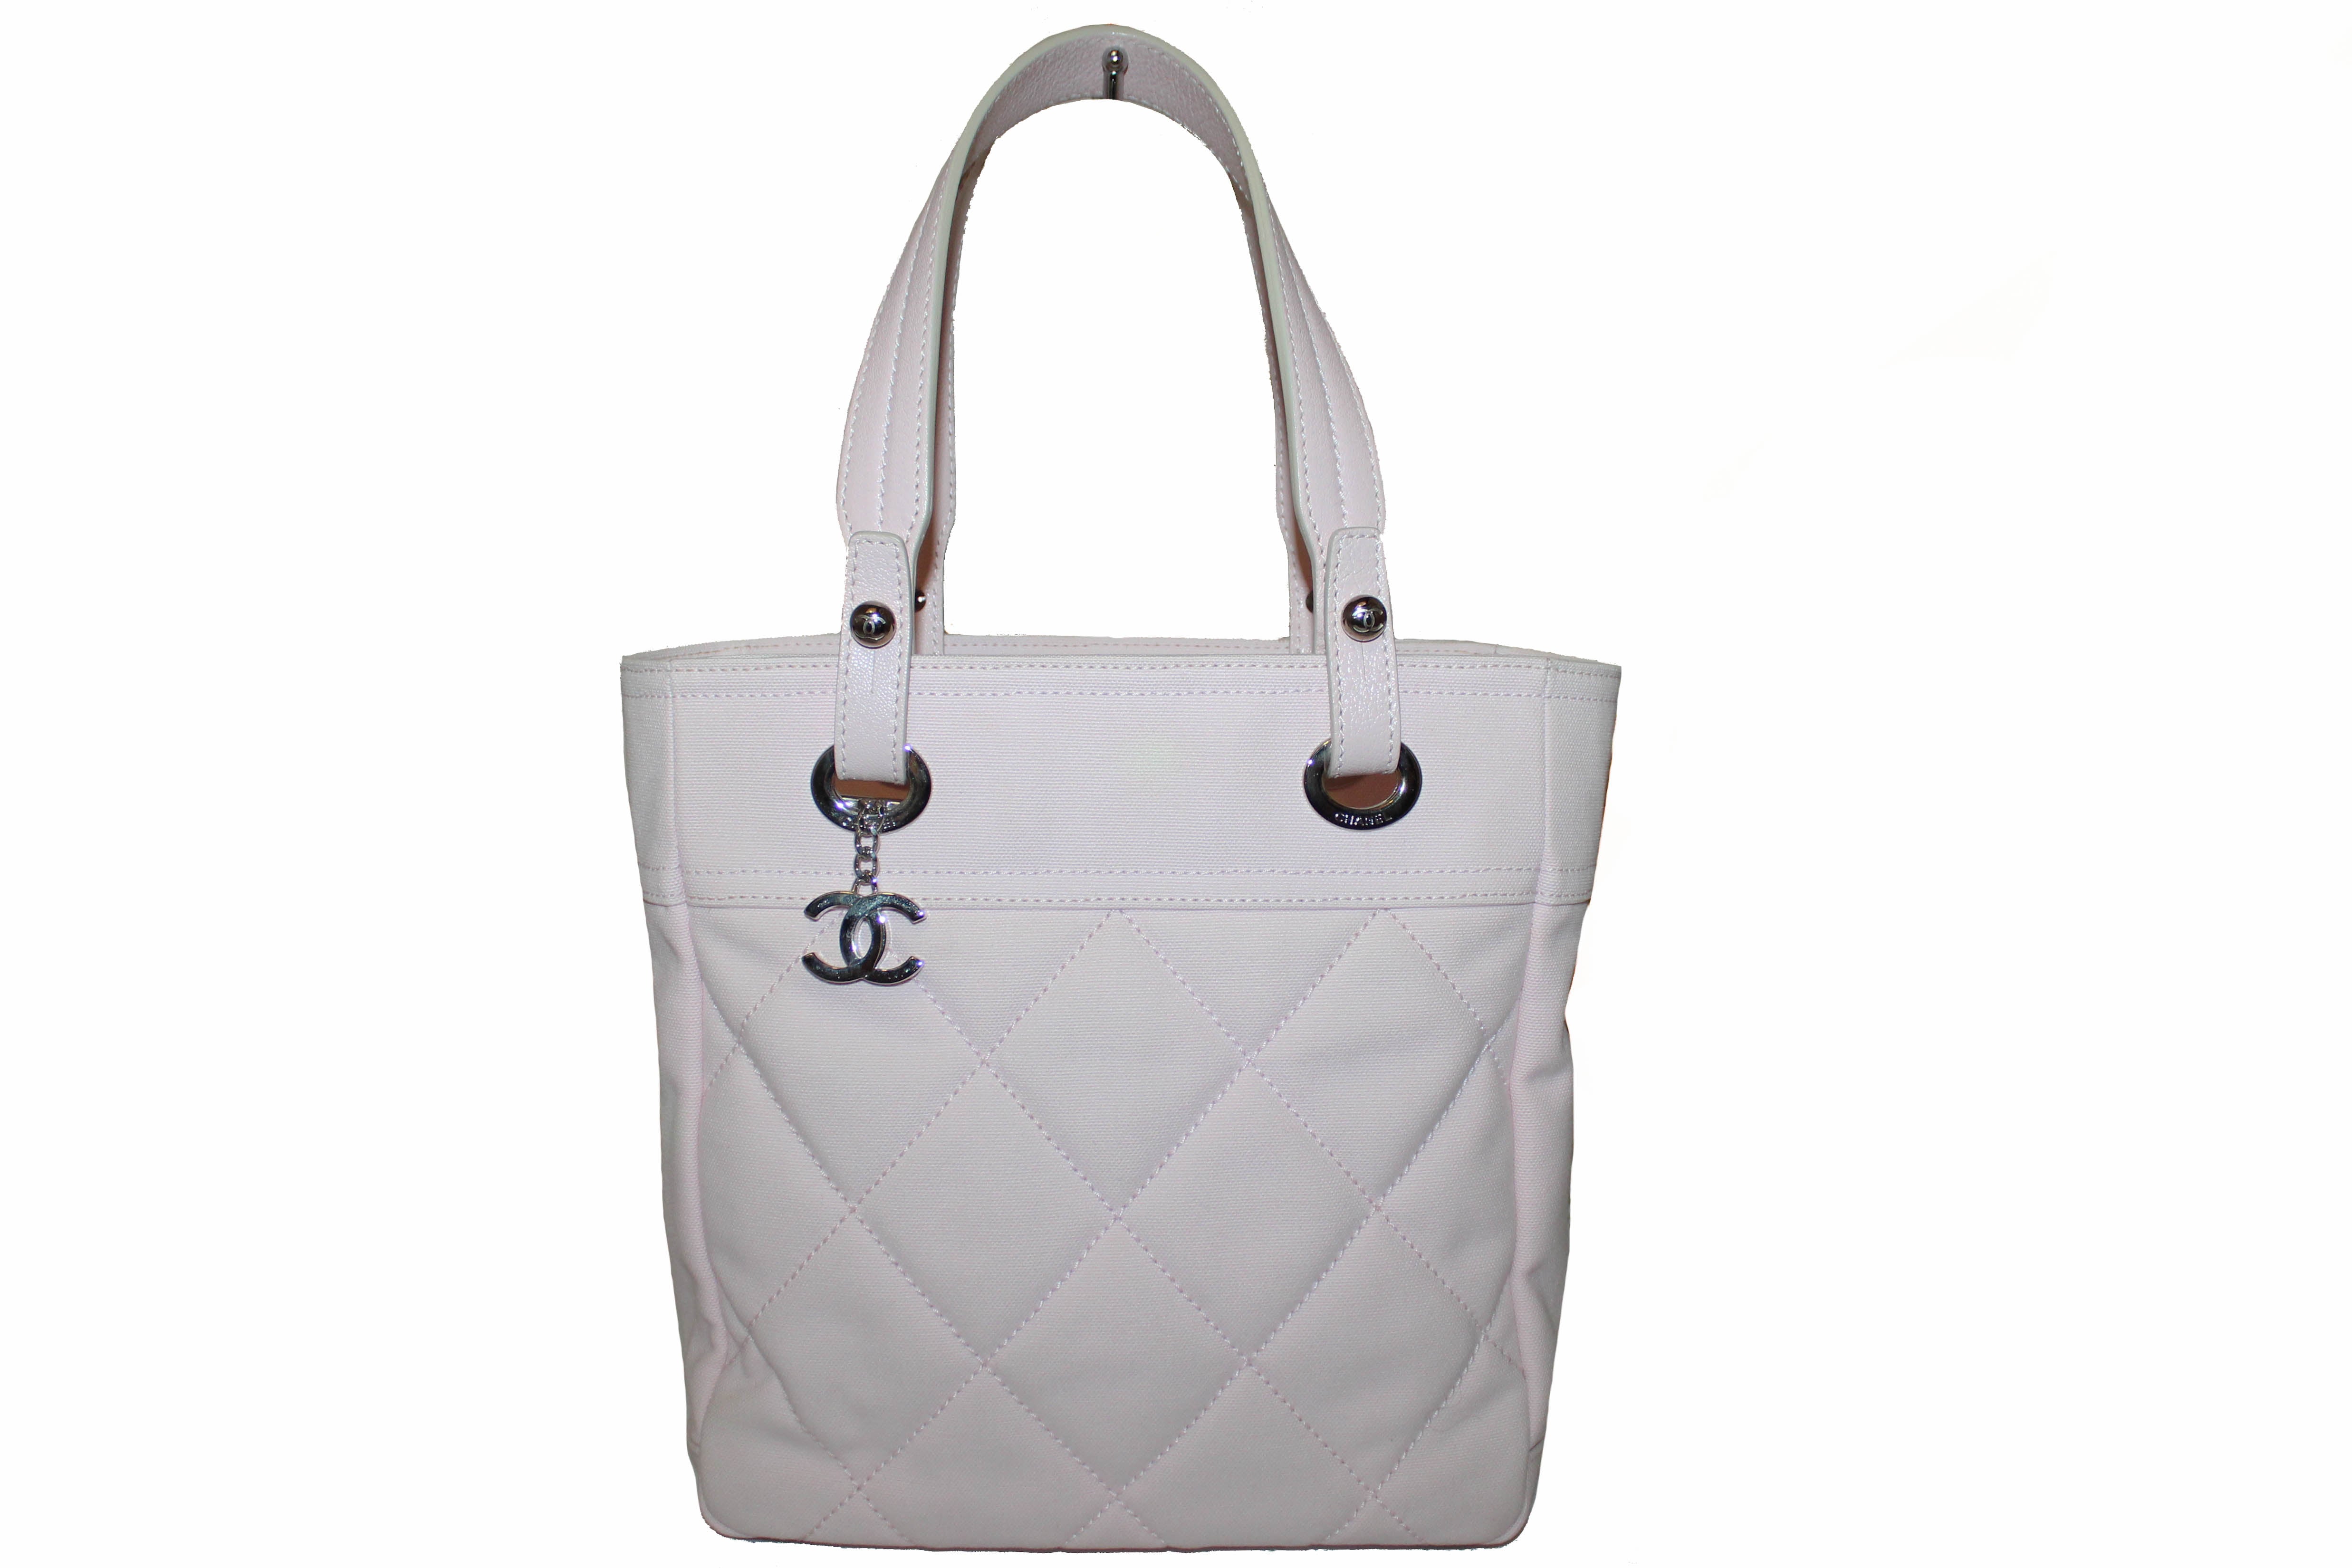 Chanel White Tote Bags